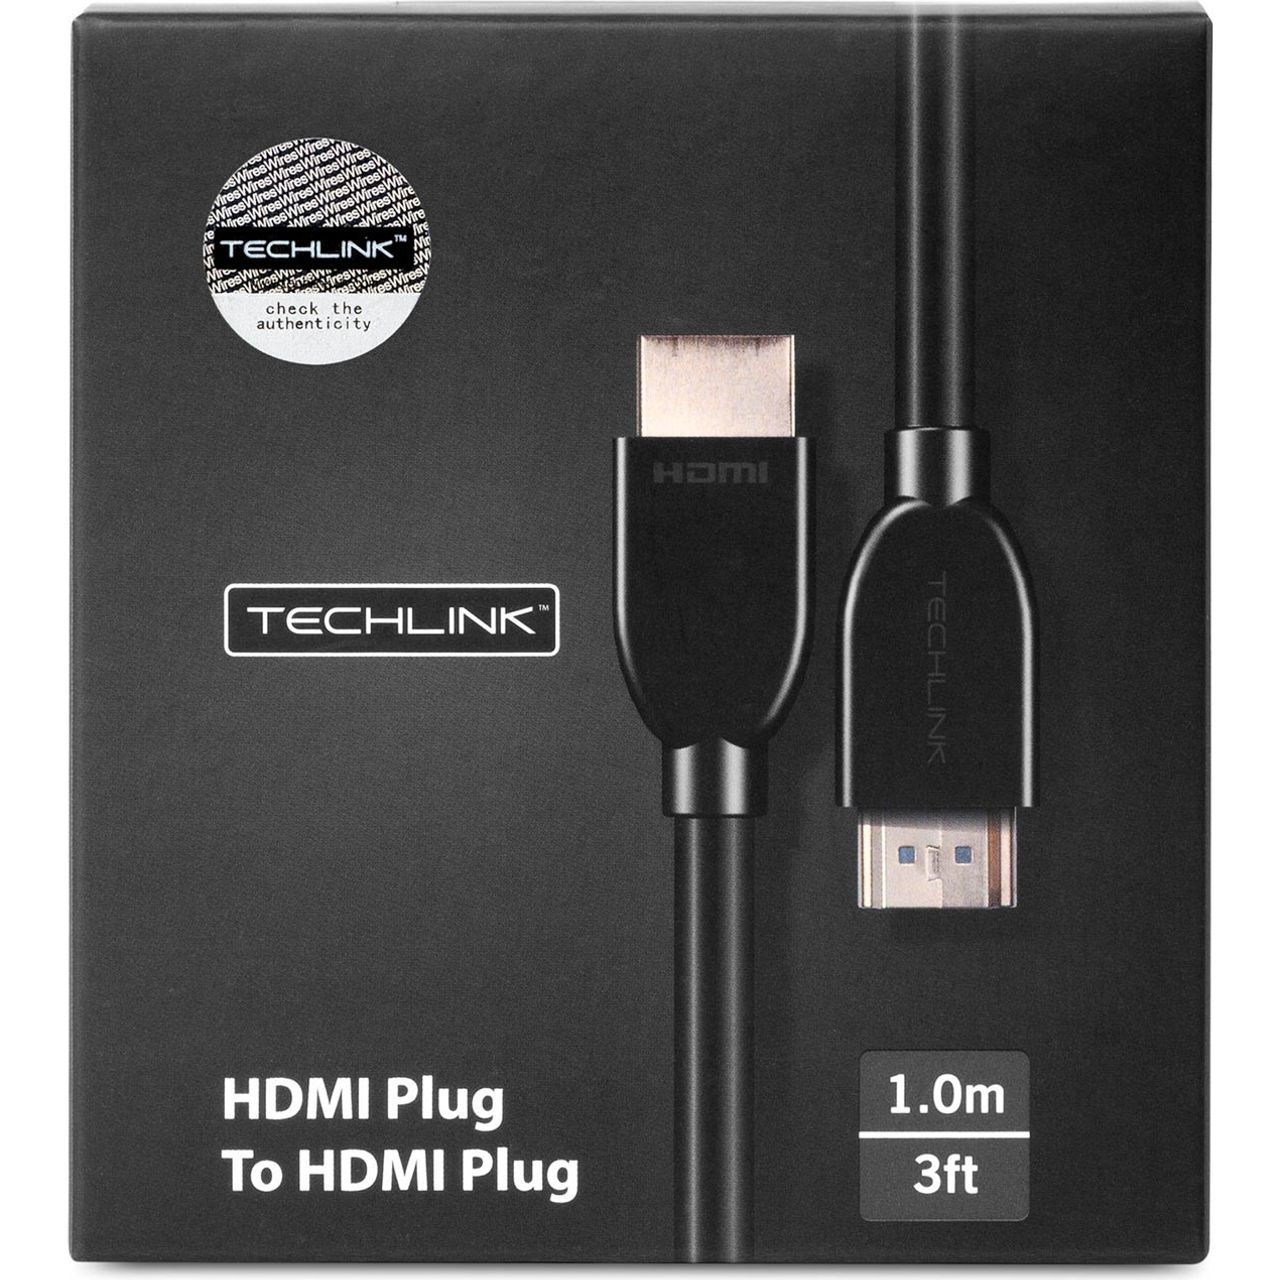 Techlink 103201 1m HDMI Cable Review